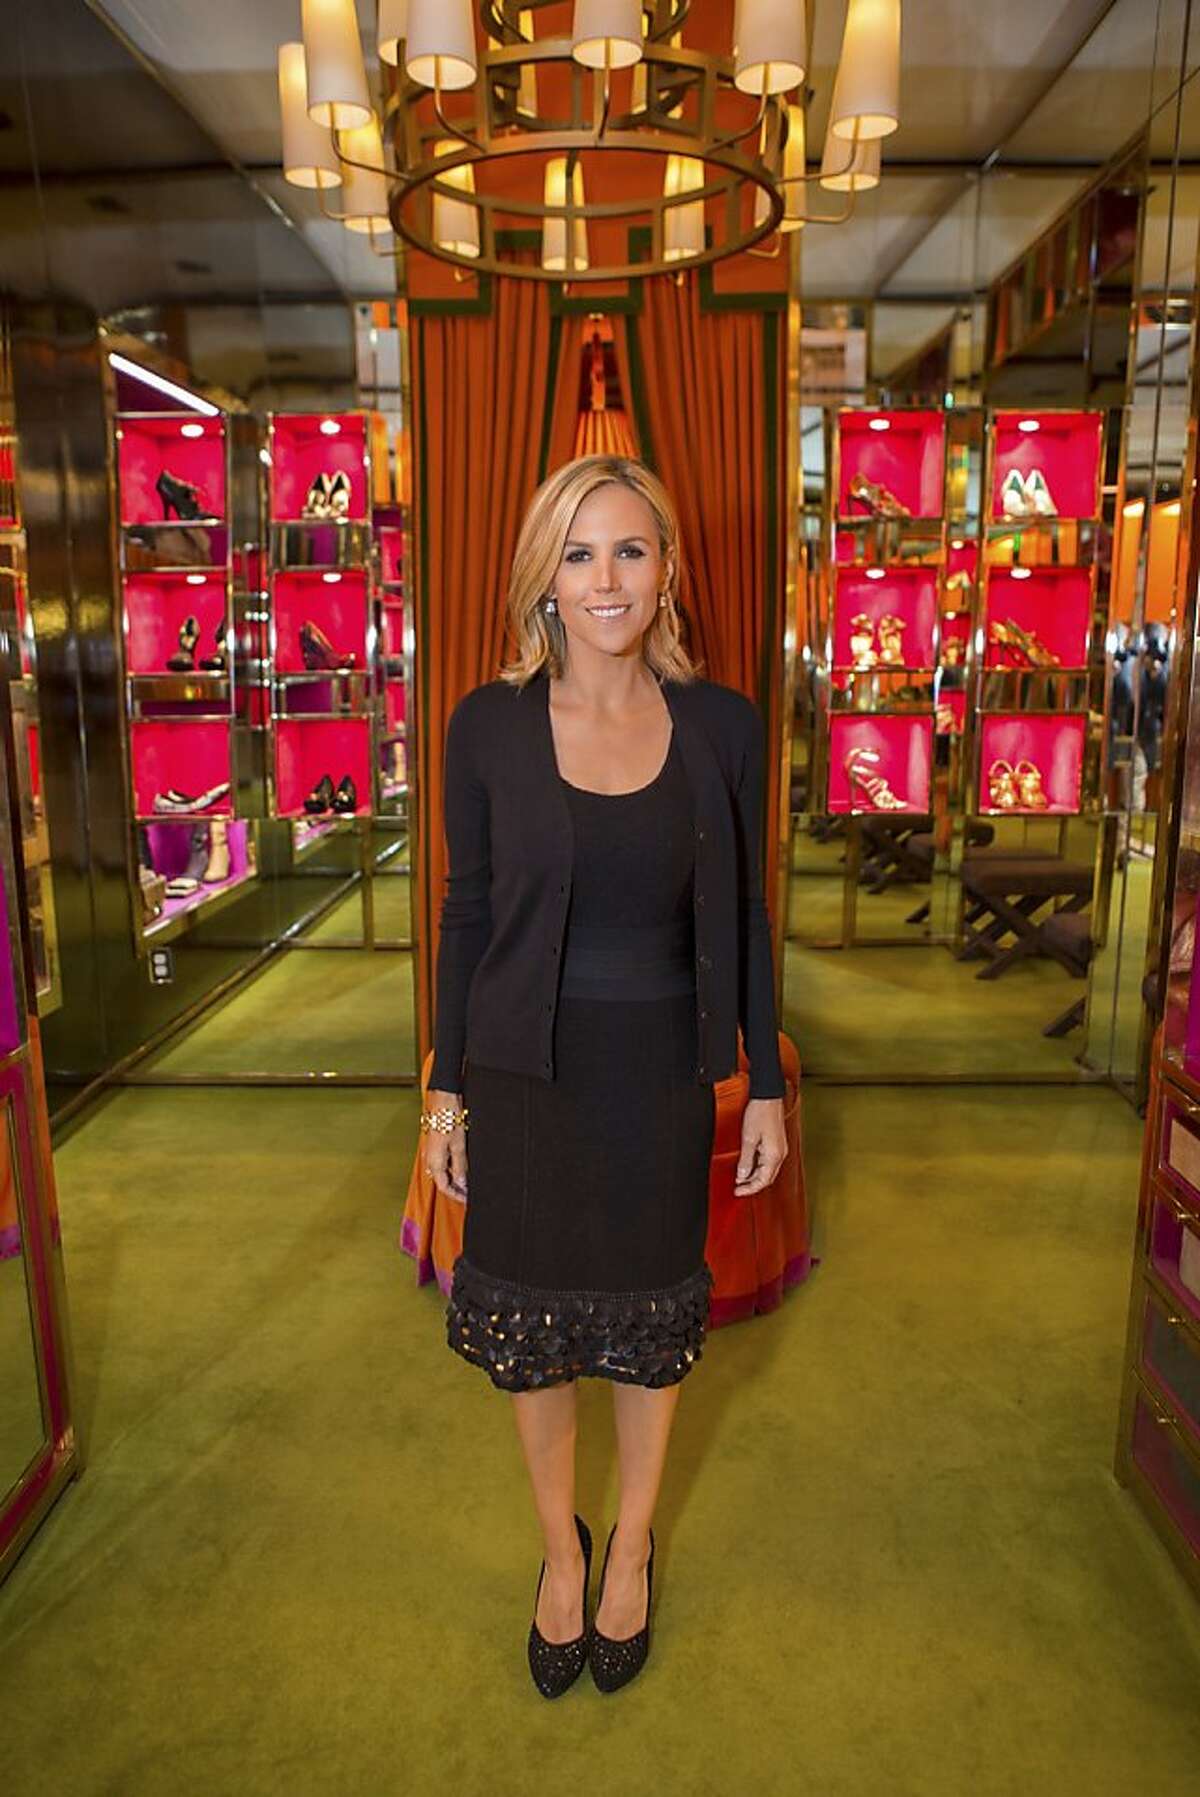 Empowerment in fashion for Tory Burch